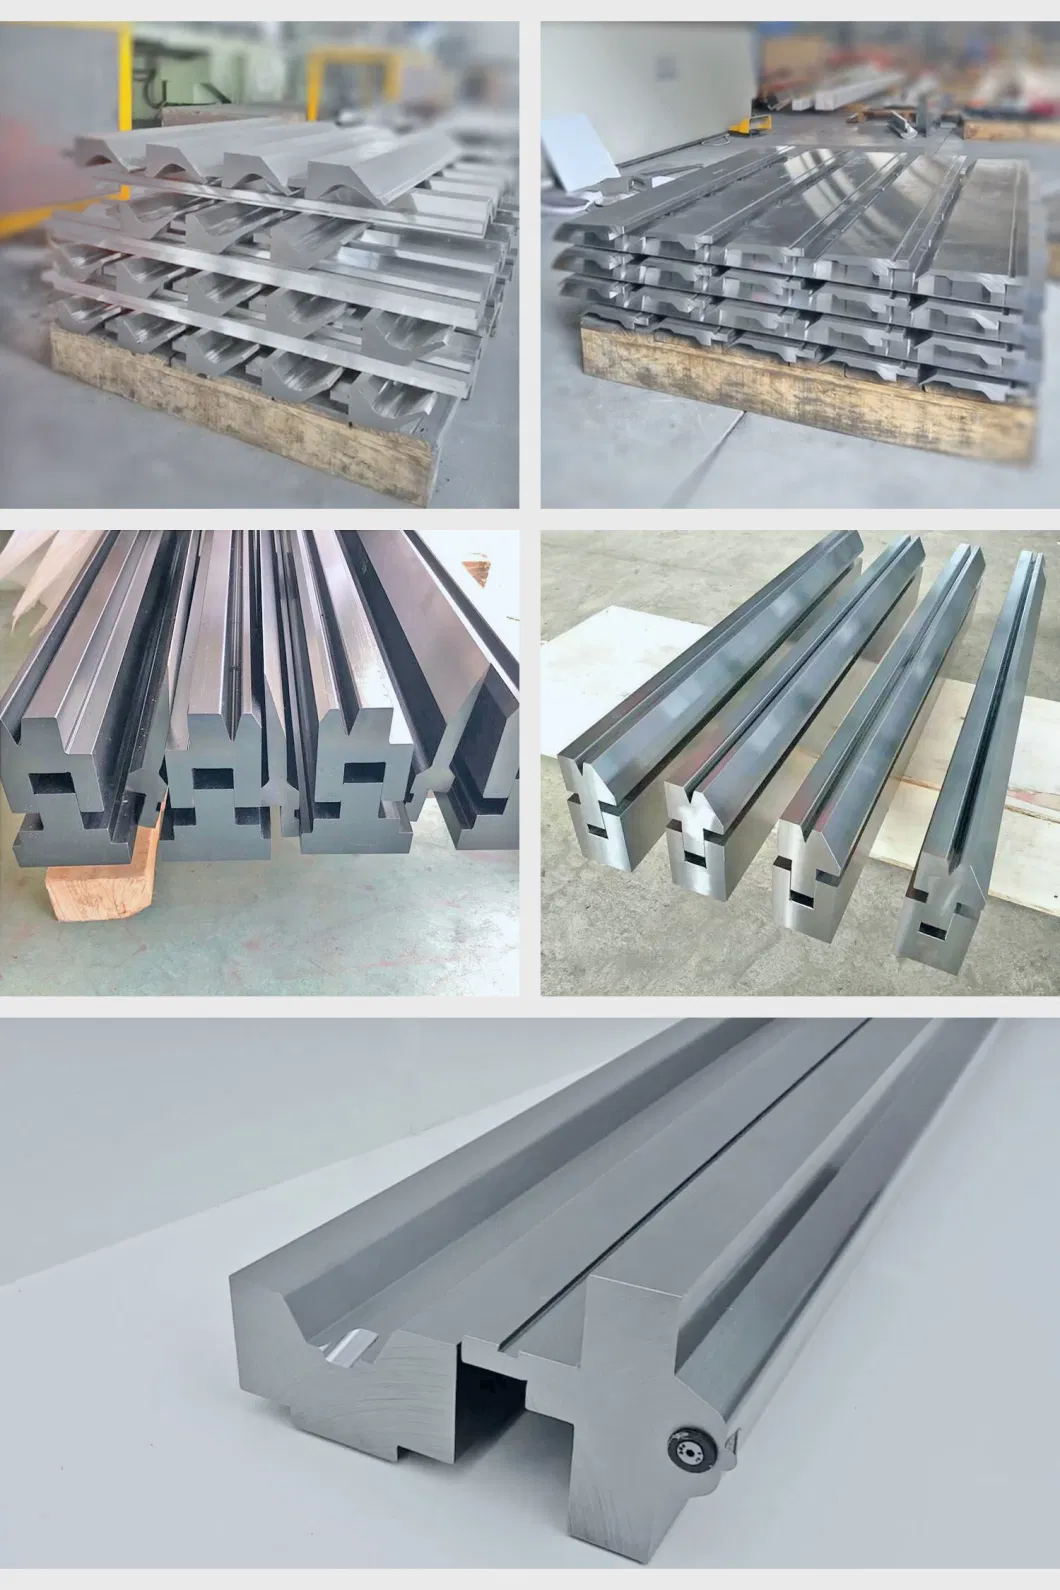 Made in China Bending Machine Mould Tools for Hydraulic Sheet Metal Press Brake Tooling